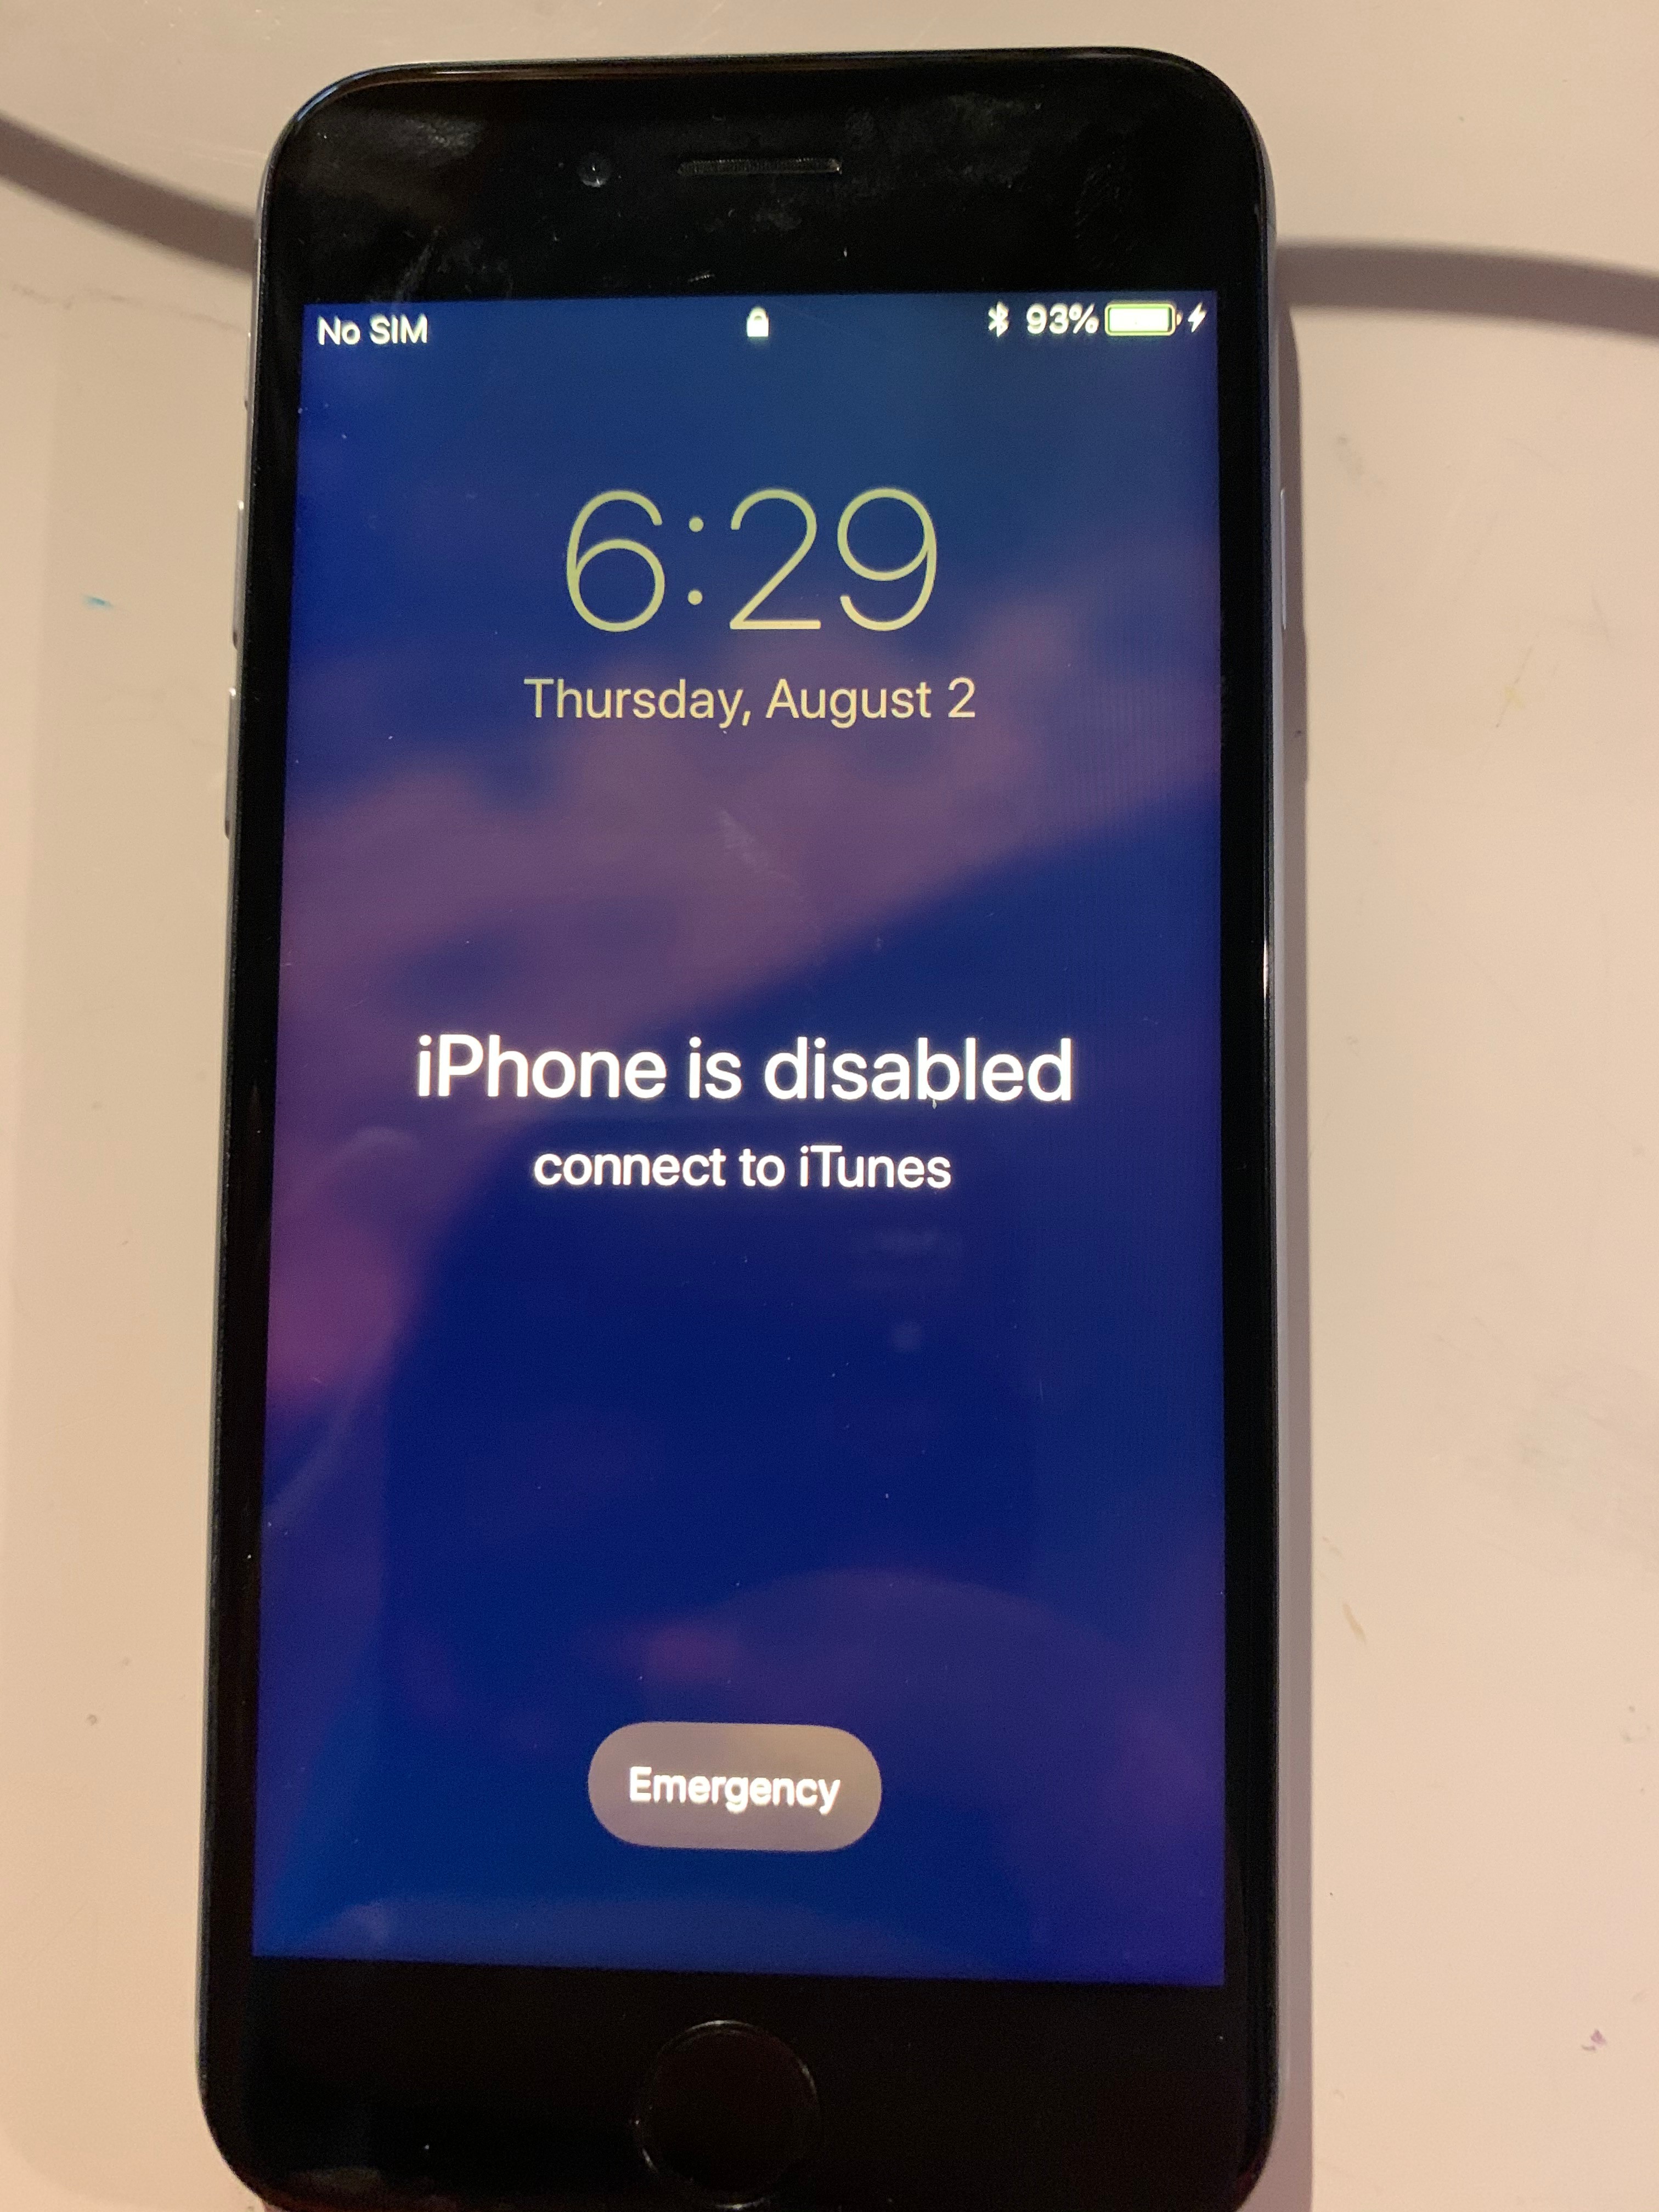 unable to restore iphone 6s using catalina - Apple Community